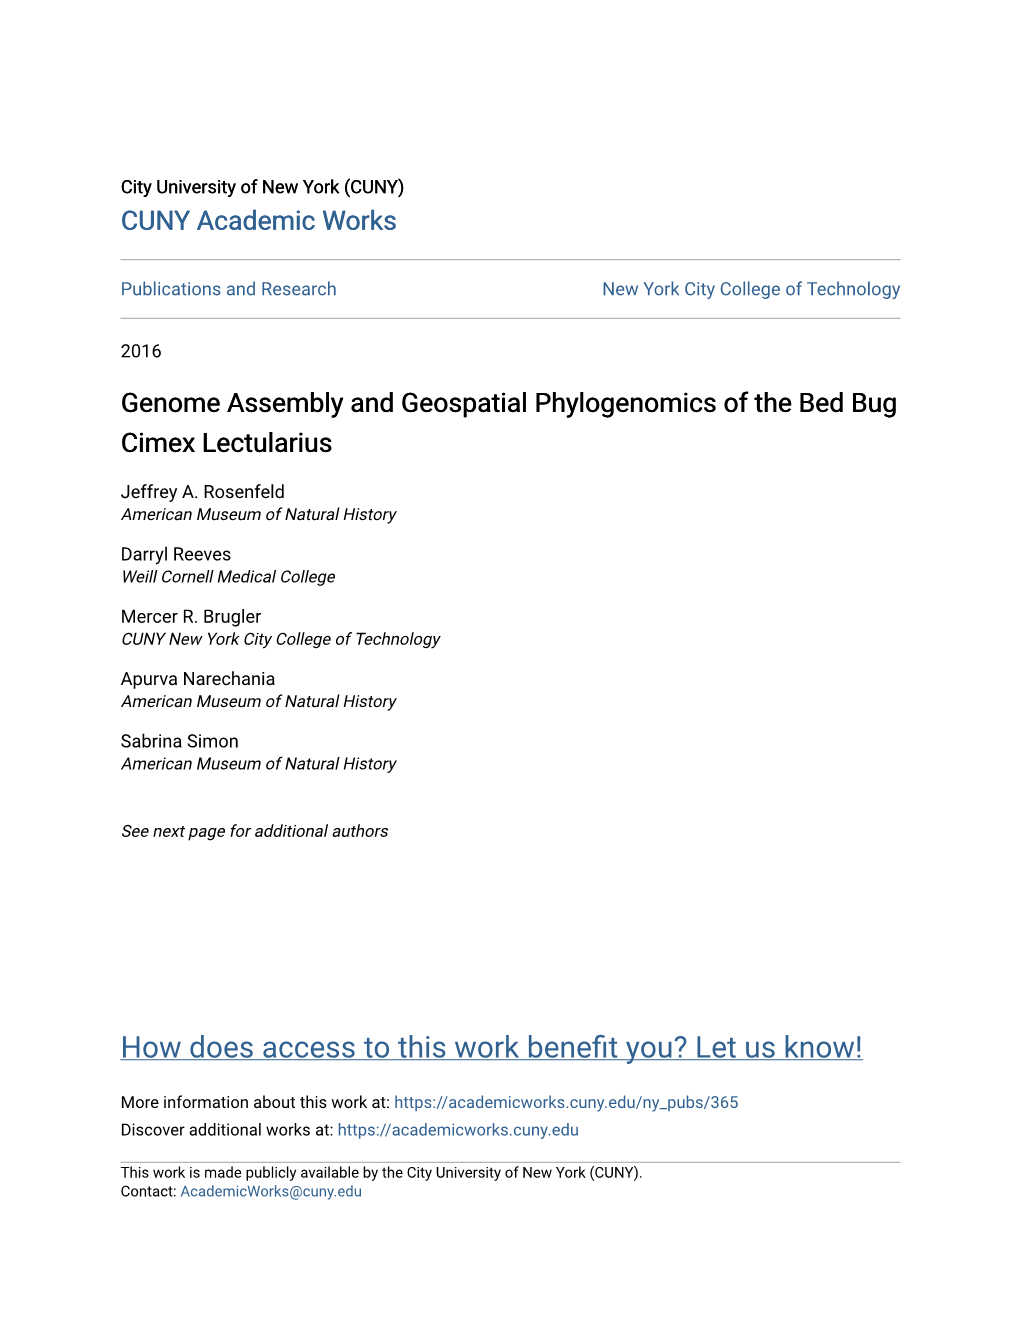 Genome Assembly and Geospatial Phylogenomics of the Bed Bug Cimex Lectularius